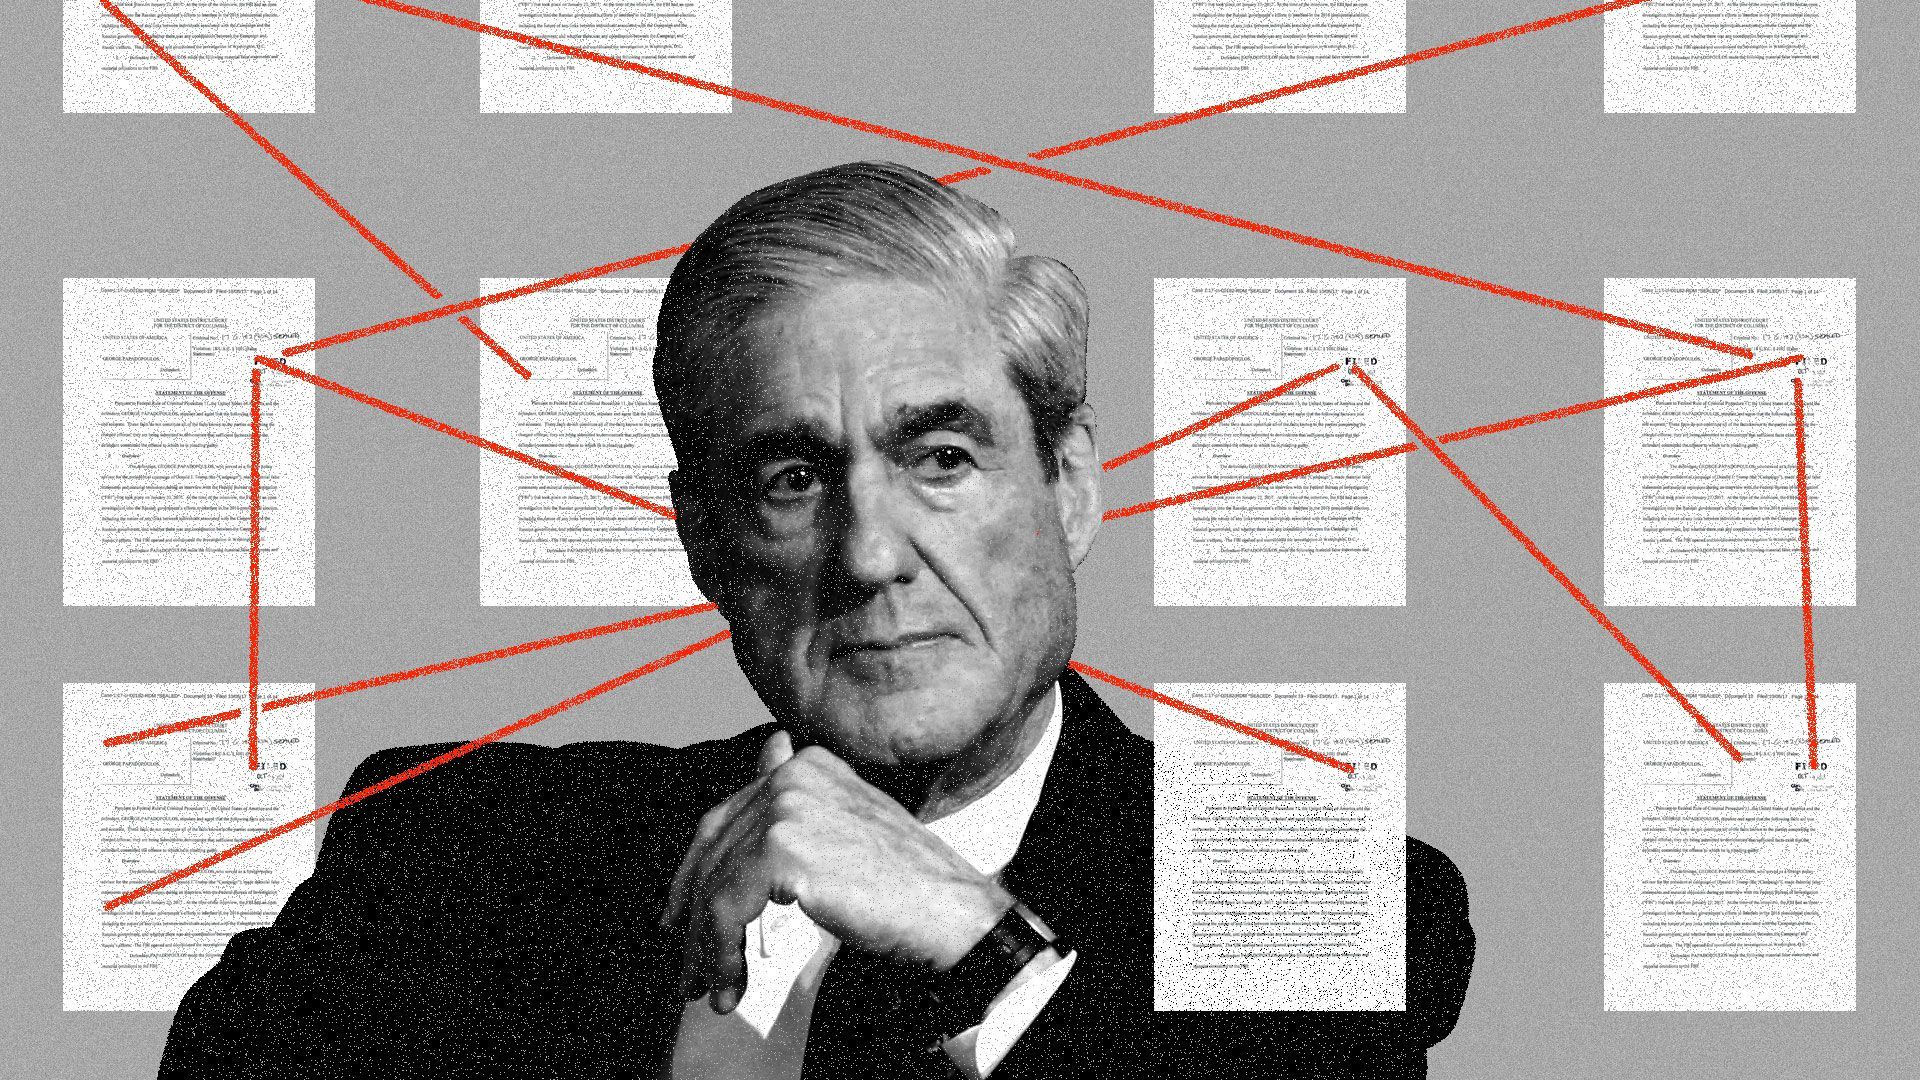 Robert Mueller surrounded by interconnected documents